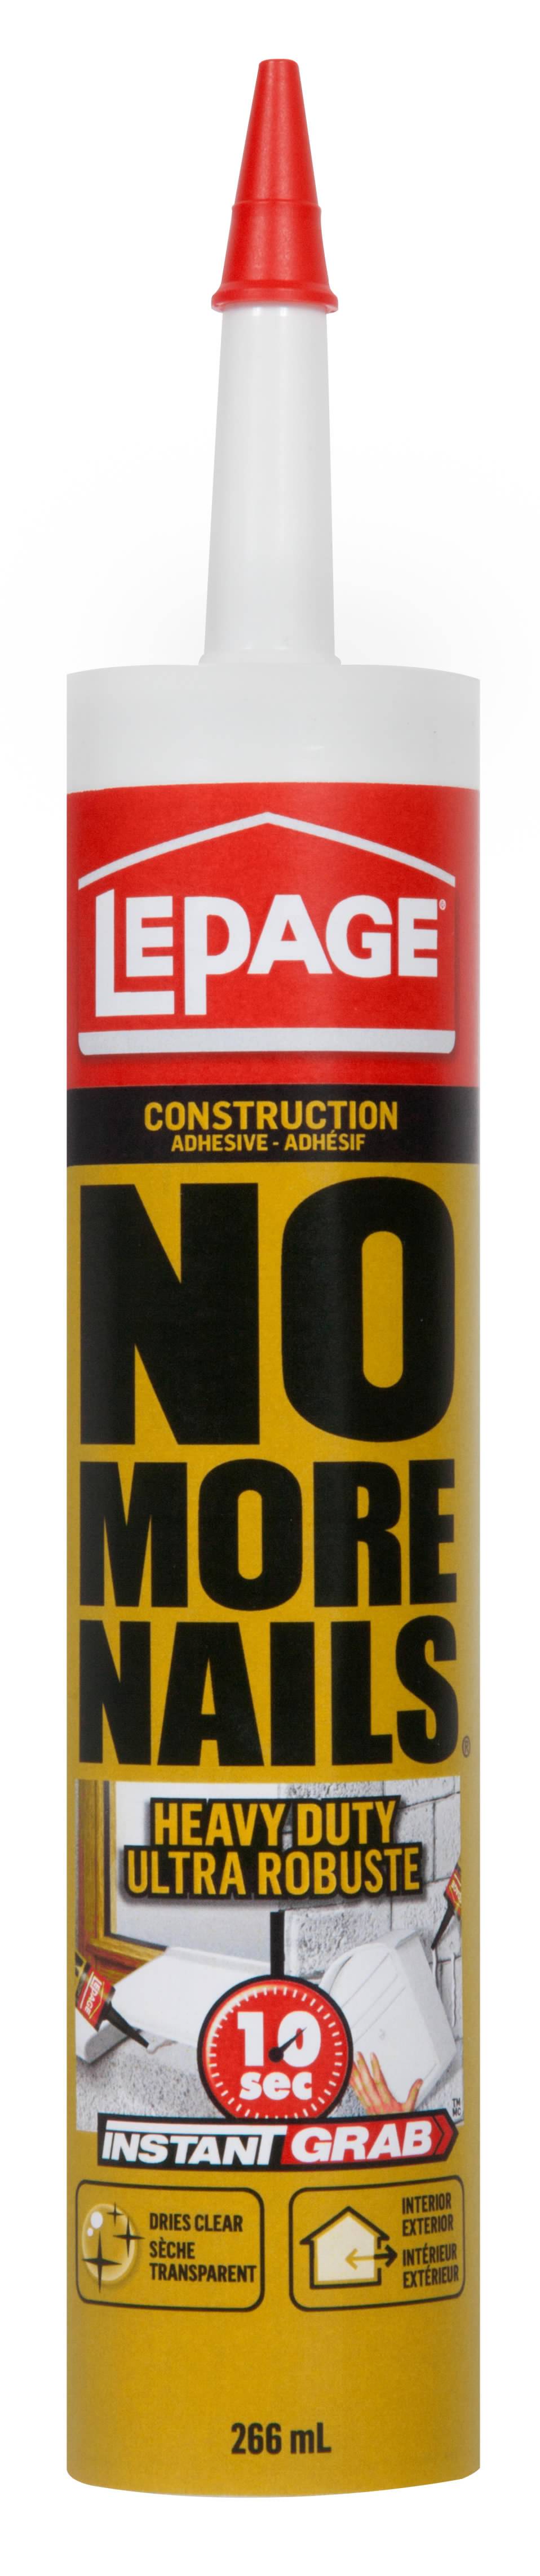 LePage-No-More-Nails-Heavy-Duty-Clear-Construction-Adhesive.jpg